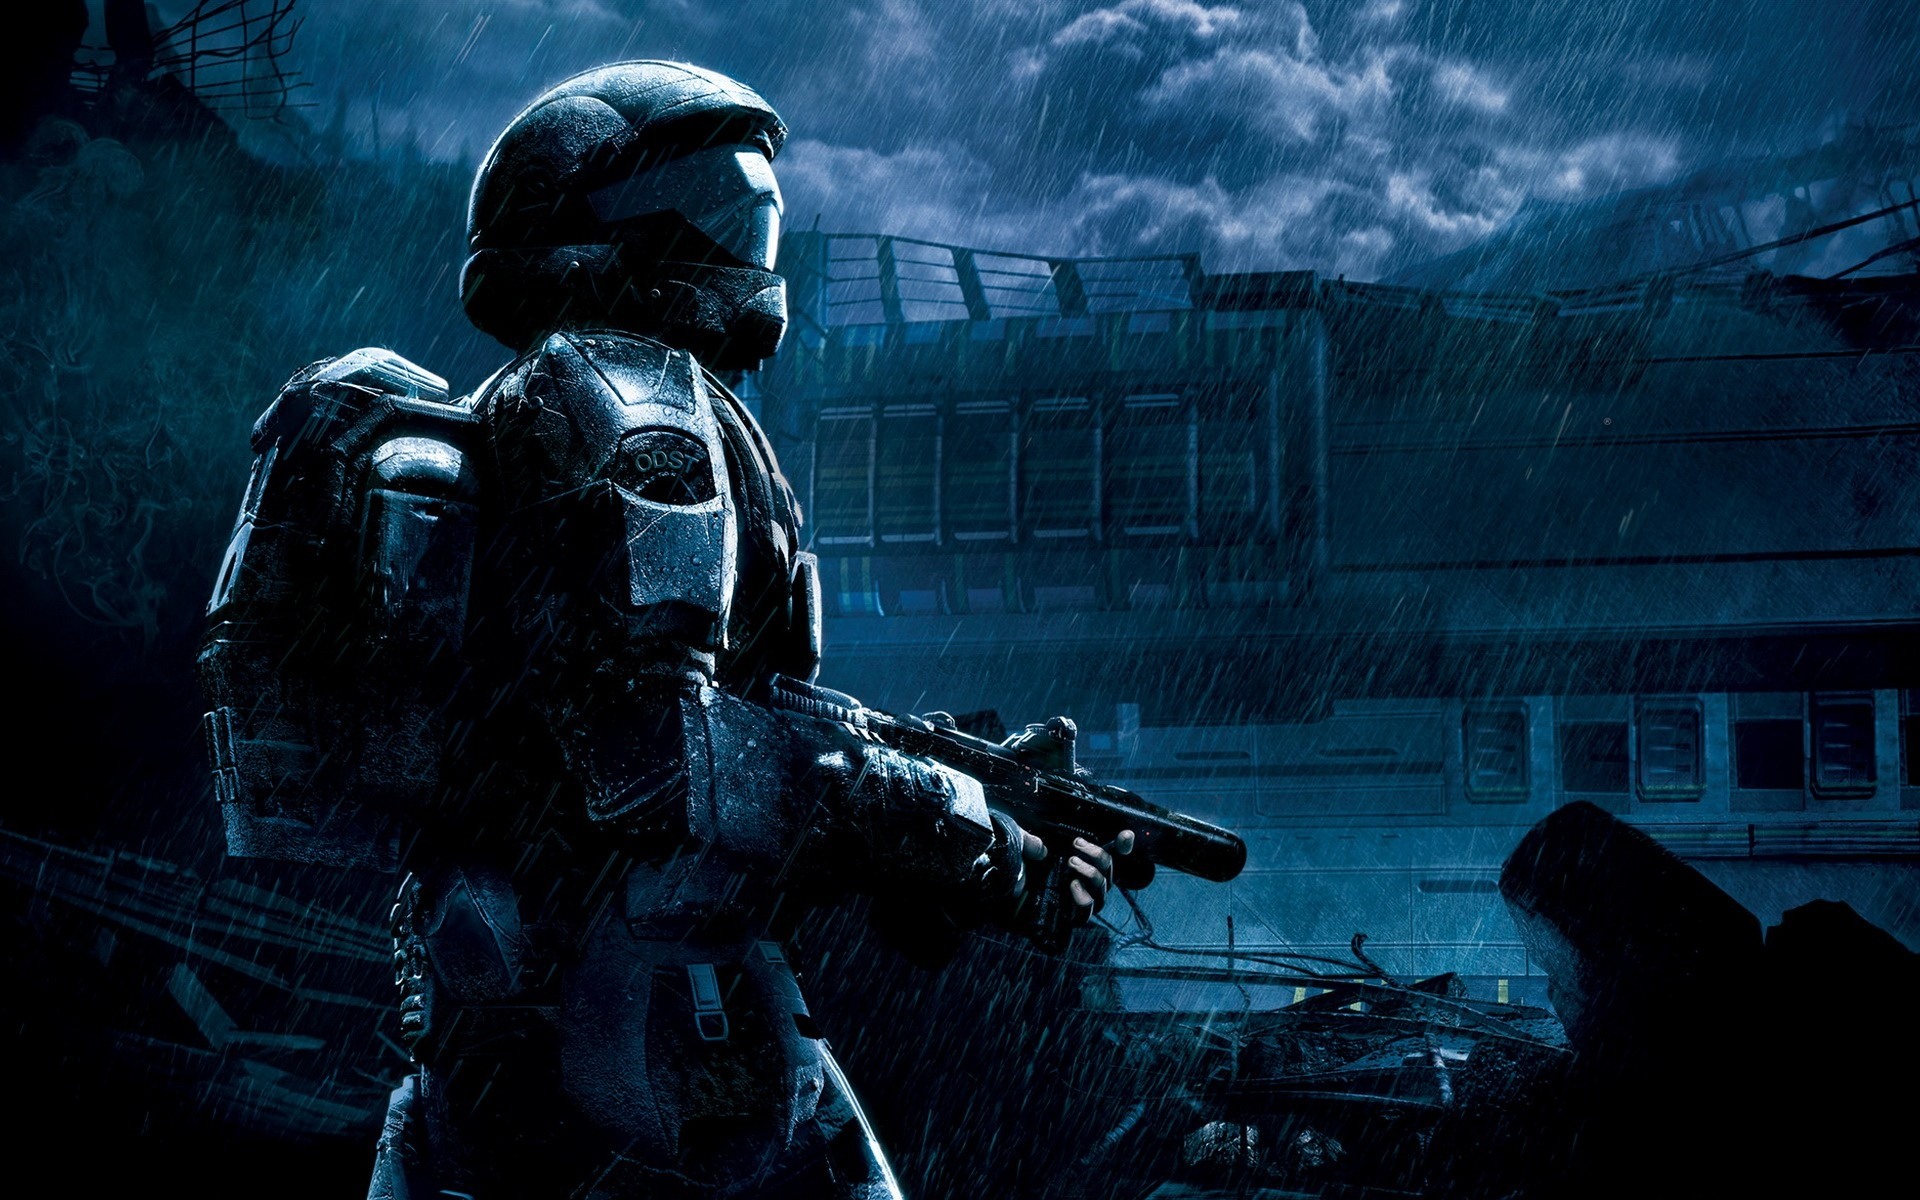 Halo game HD wallpapers #5 - 1920x1200